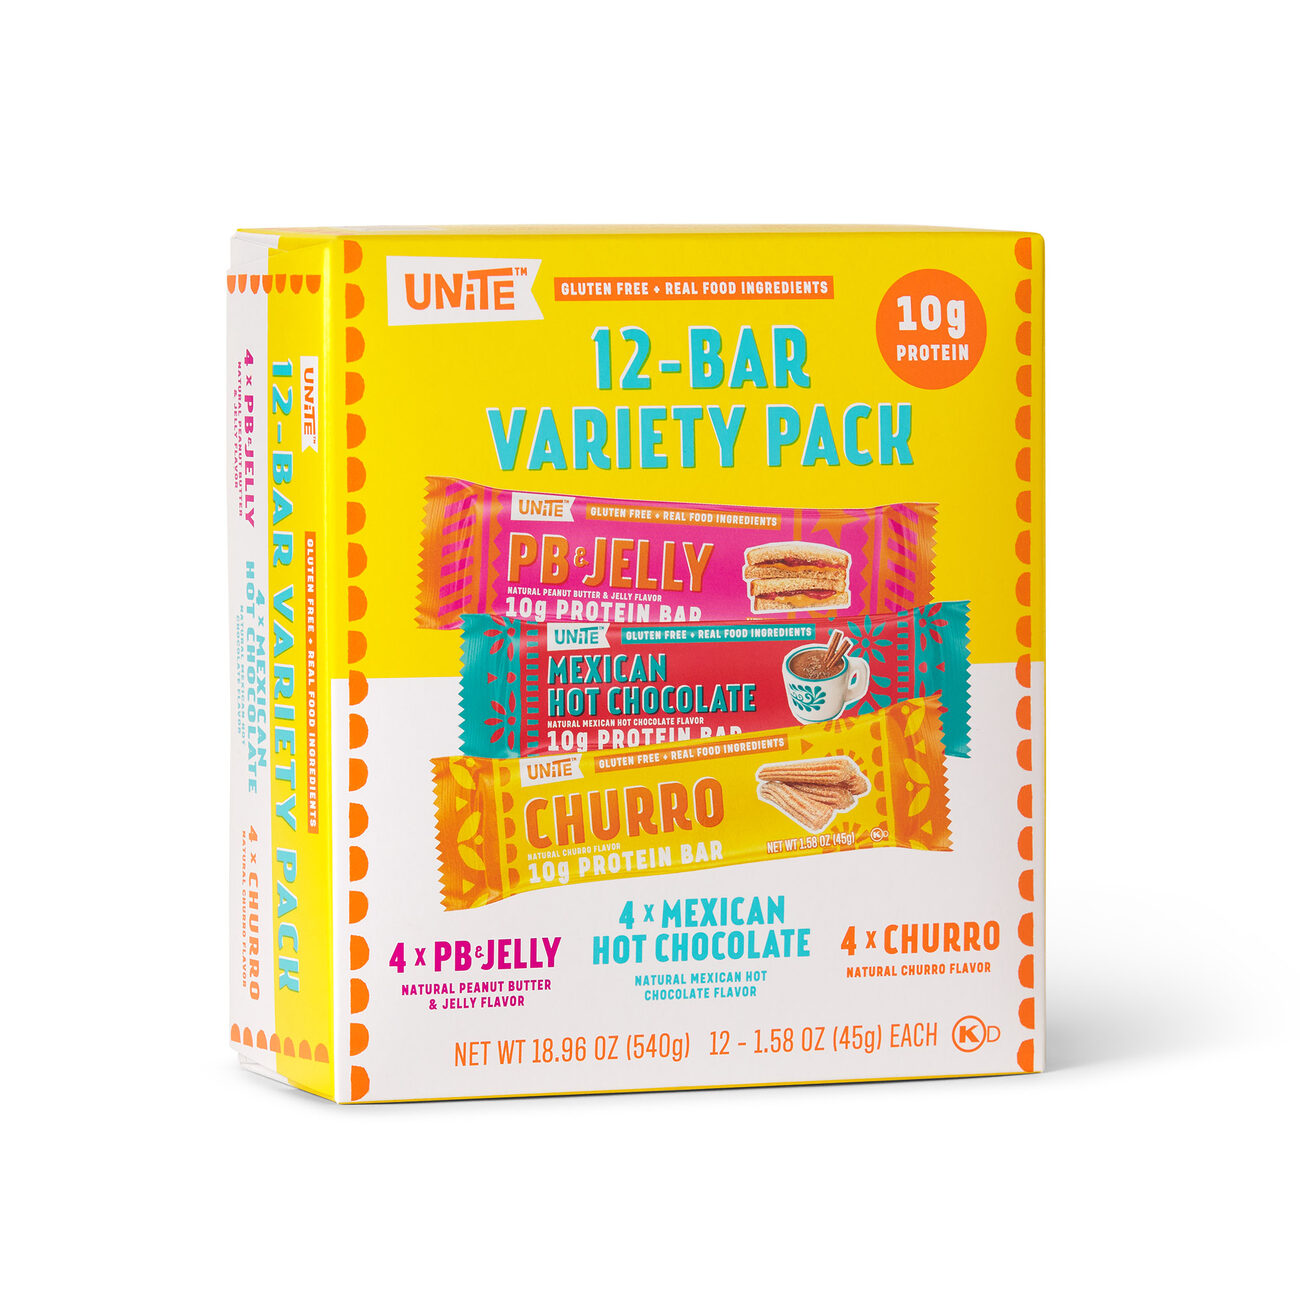 Box of Unite bars with flavors Pb&j and Mexican hot chocolate and churro